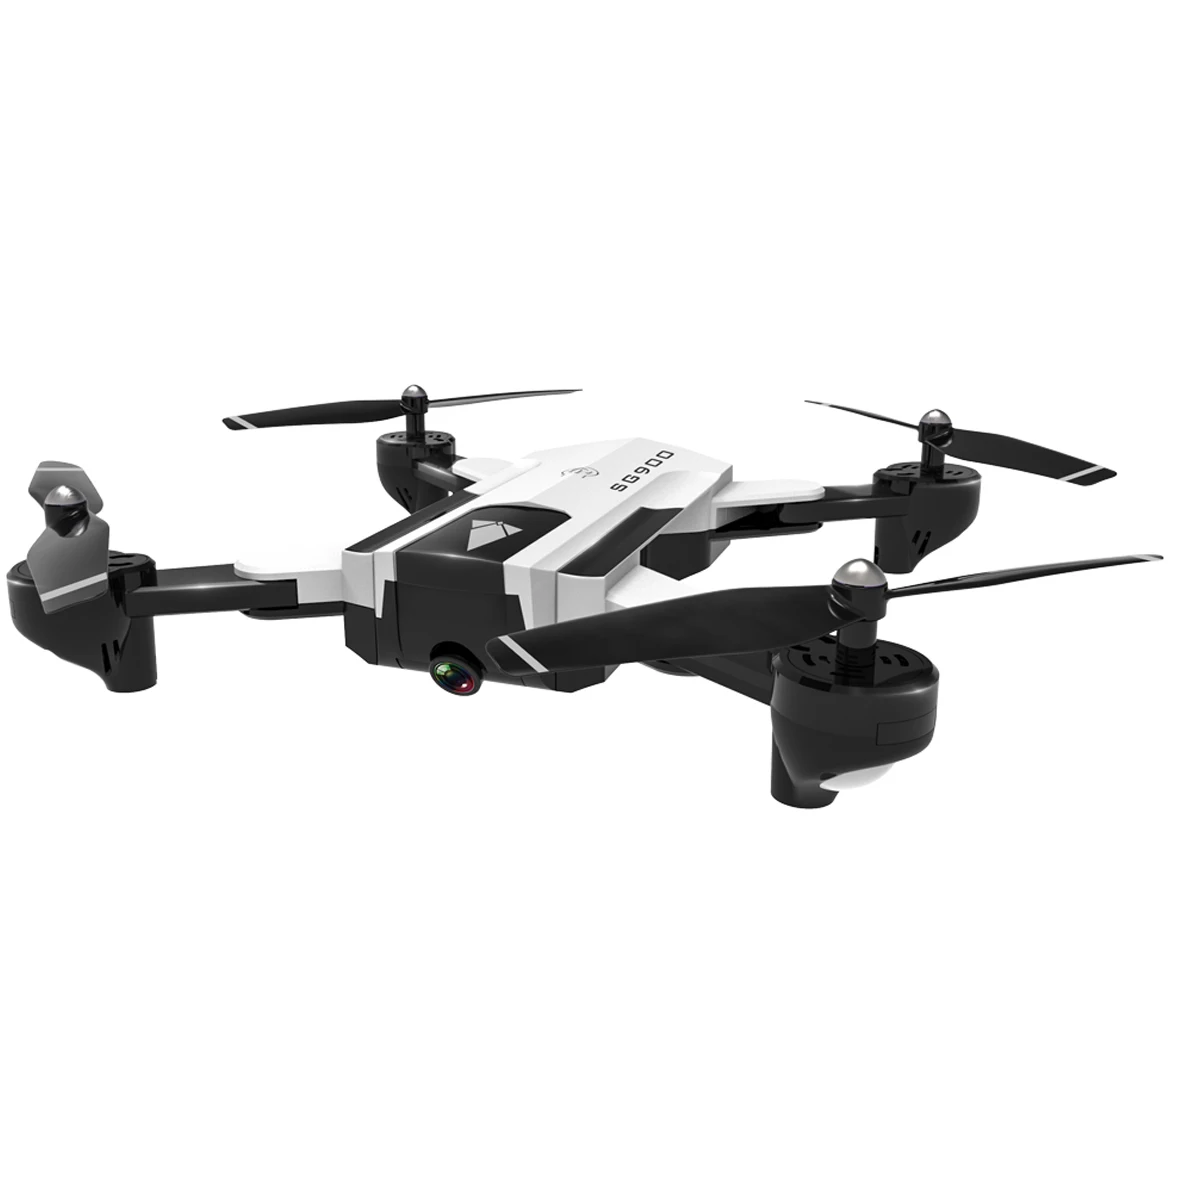 Source Drone sg900 gps camera drone professional optical flow on m.alibaba.com